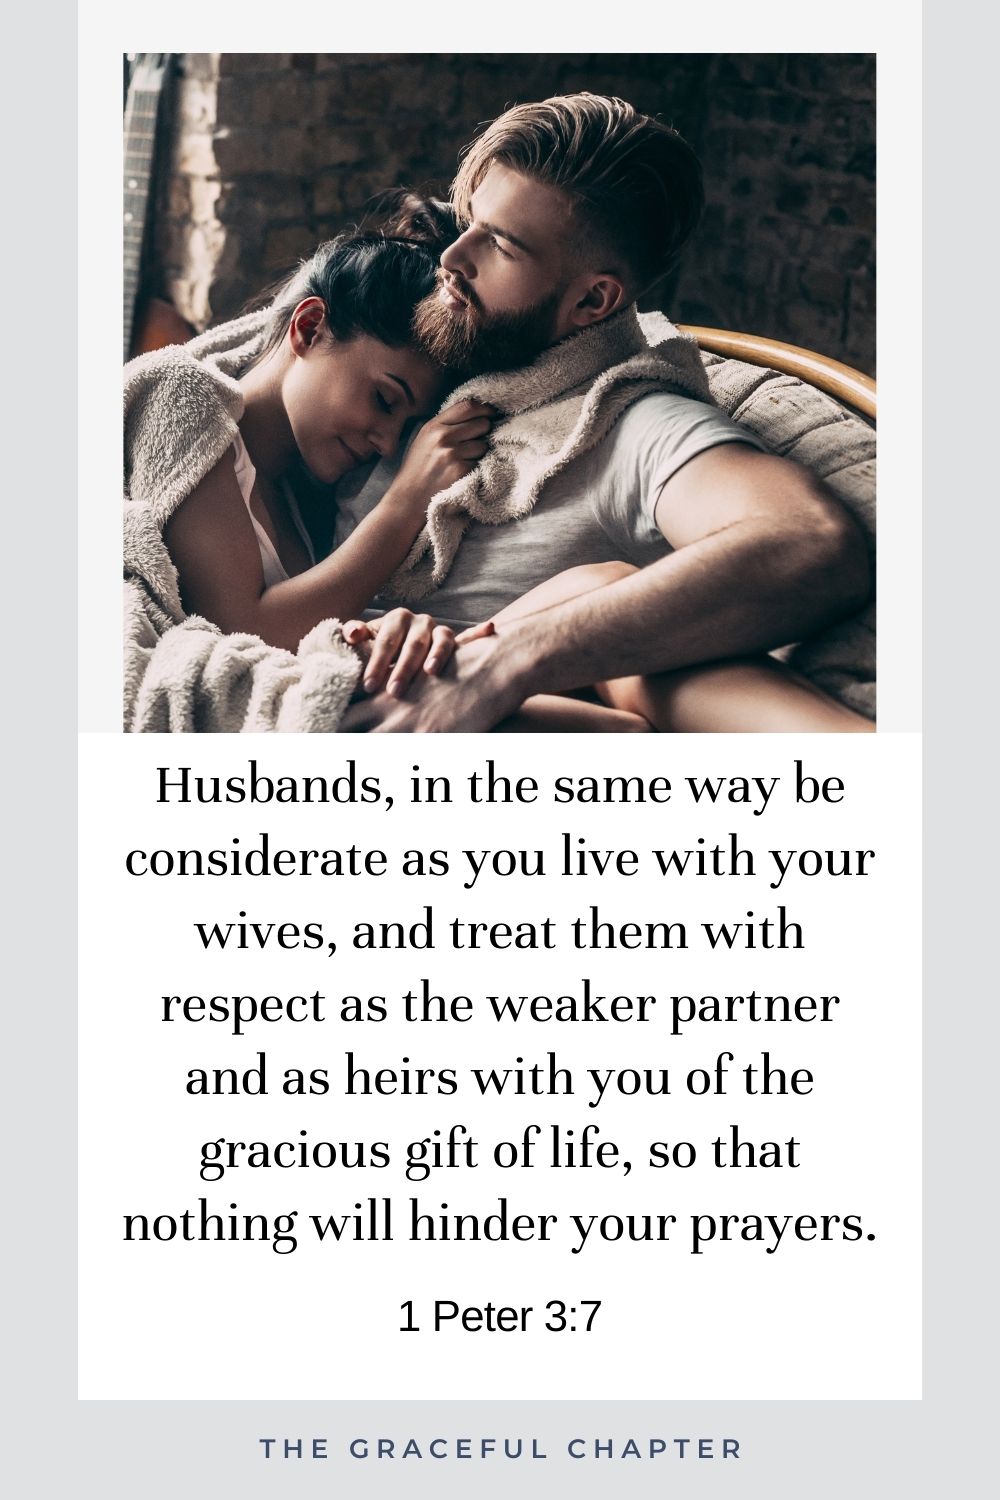 Husbands, in the same way be considerate as you live with your wives, and treat them with respect as the weaker partner and as heirs with you of the gracious gift of life, so that nothing will hinder your prayers. 1 Peter 3:7